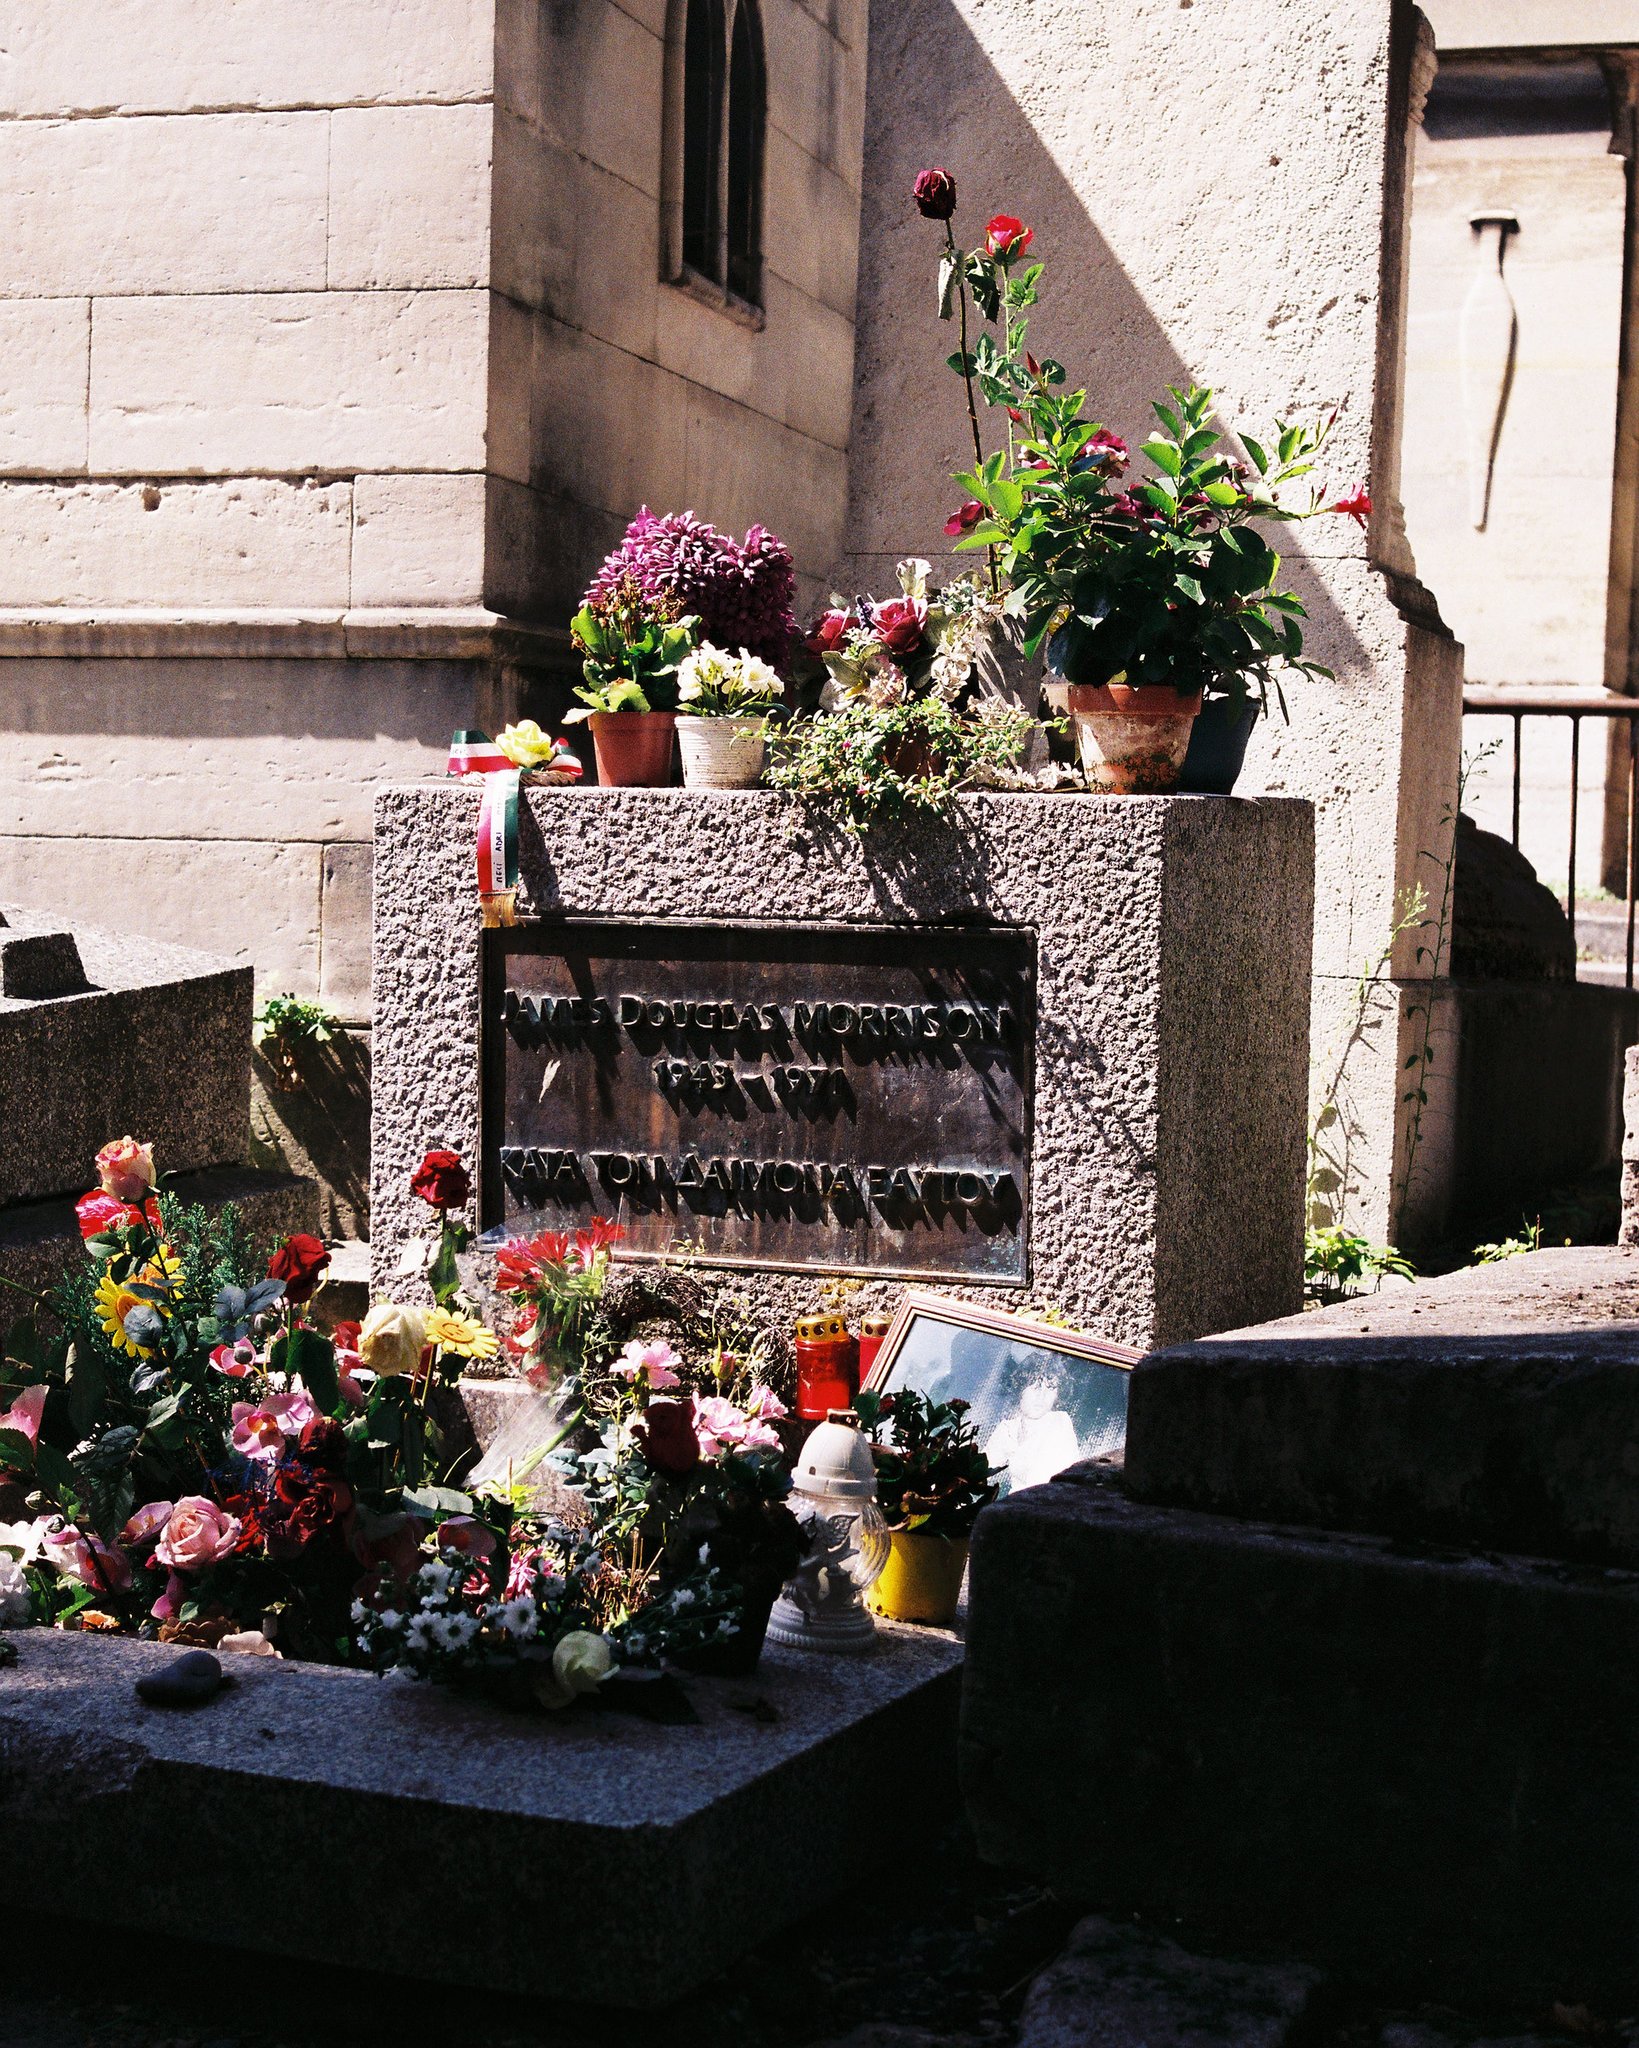 Happy birthday to Jim morrison. Glad I had the chance to visit your tomb. Rest easy lizard king. 